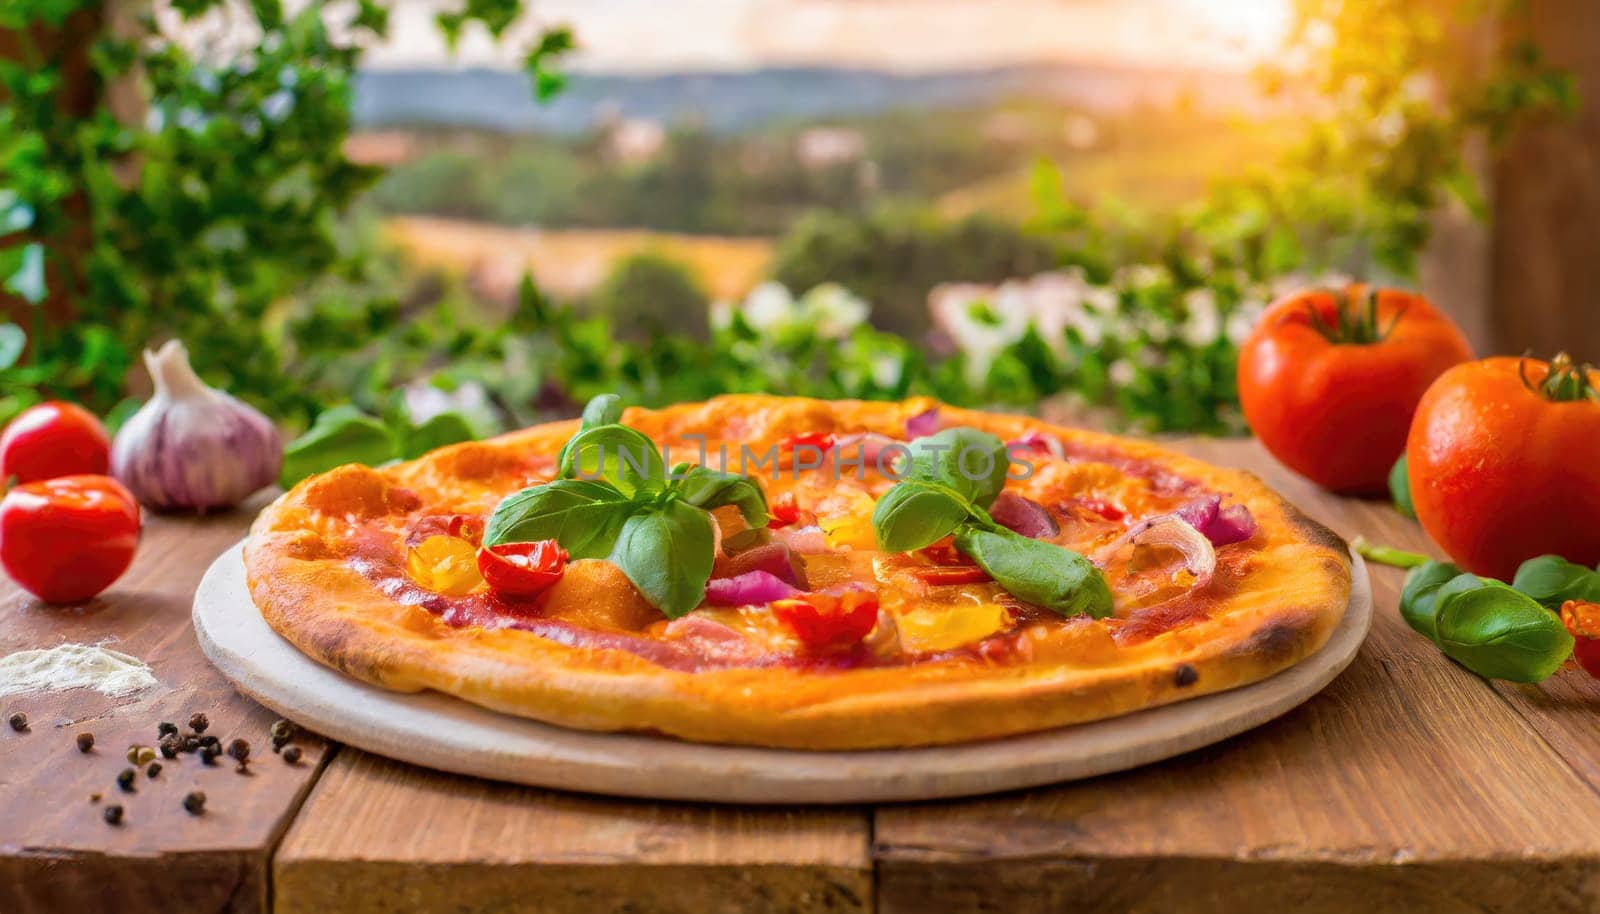 Pizza Margherita on wooden background, landscape view background.